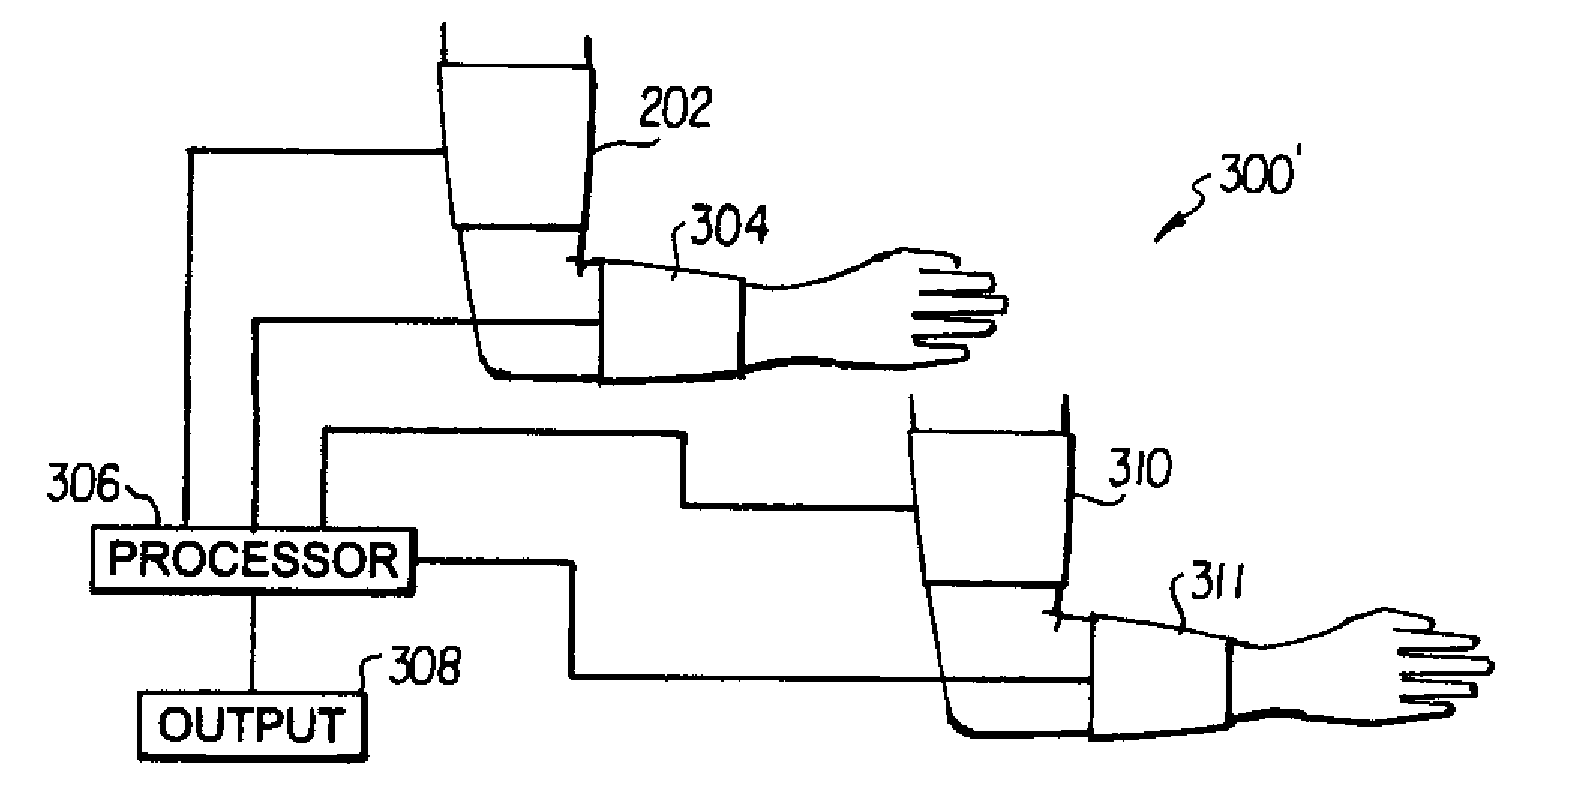 Impedance based device for non-invasive measurement of blood pressure and ankle-brachial index